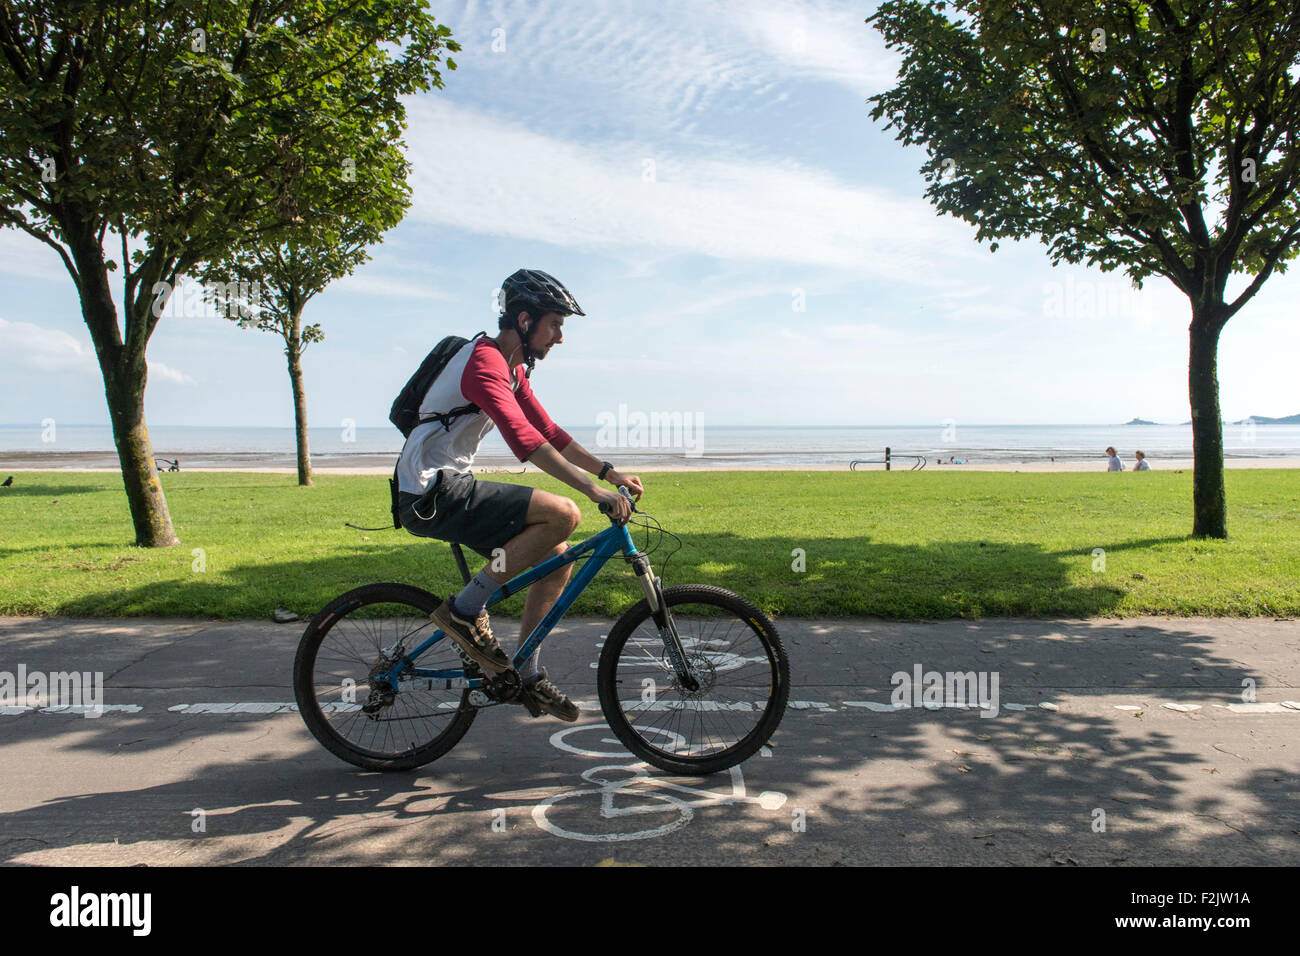 Cyclists cycle in a cycle lane along the Swansea beach promenade in Swansea, South Wales. Stock Photo